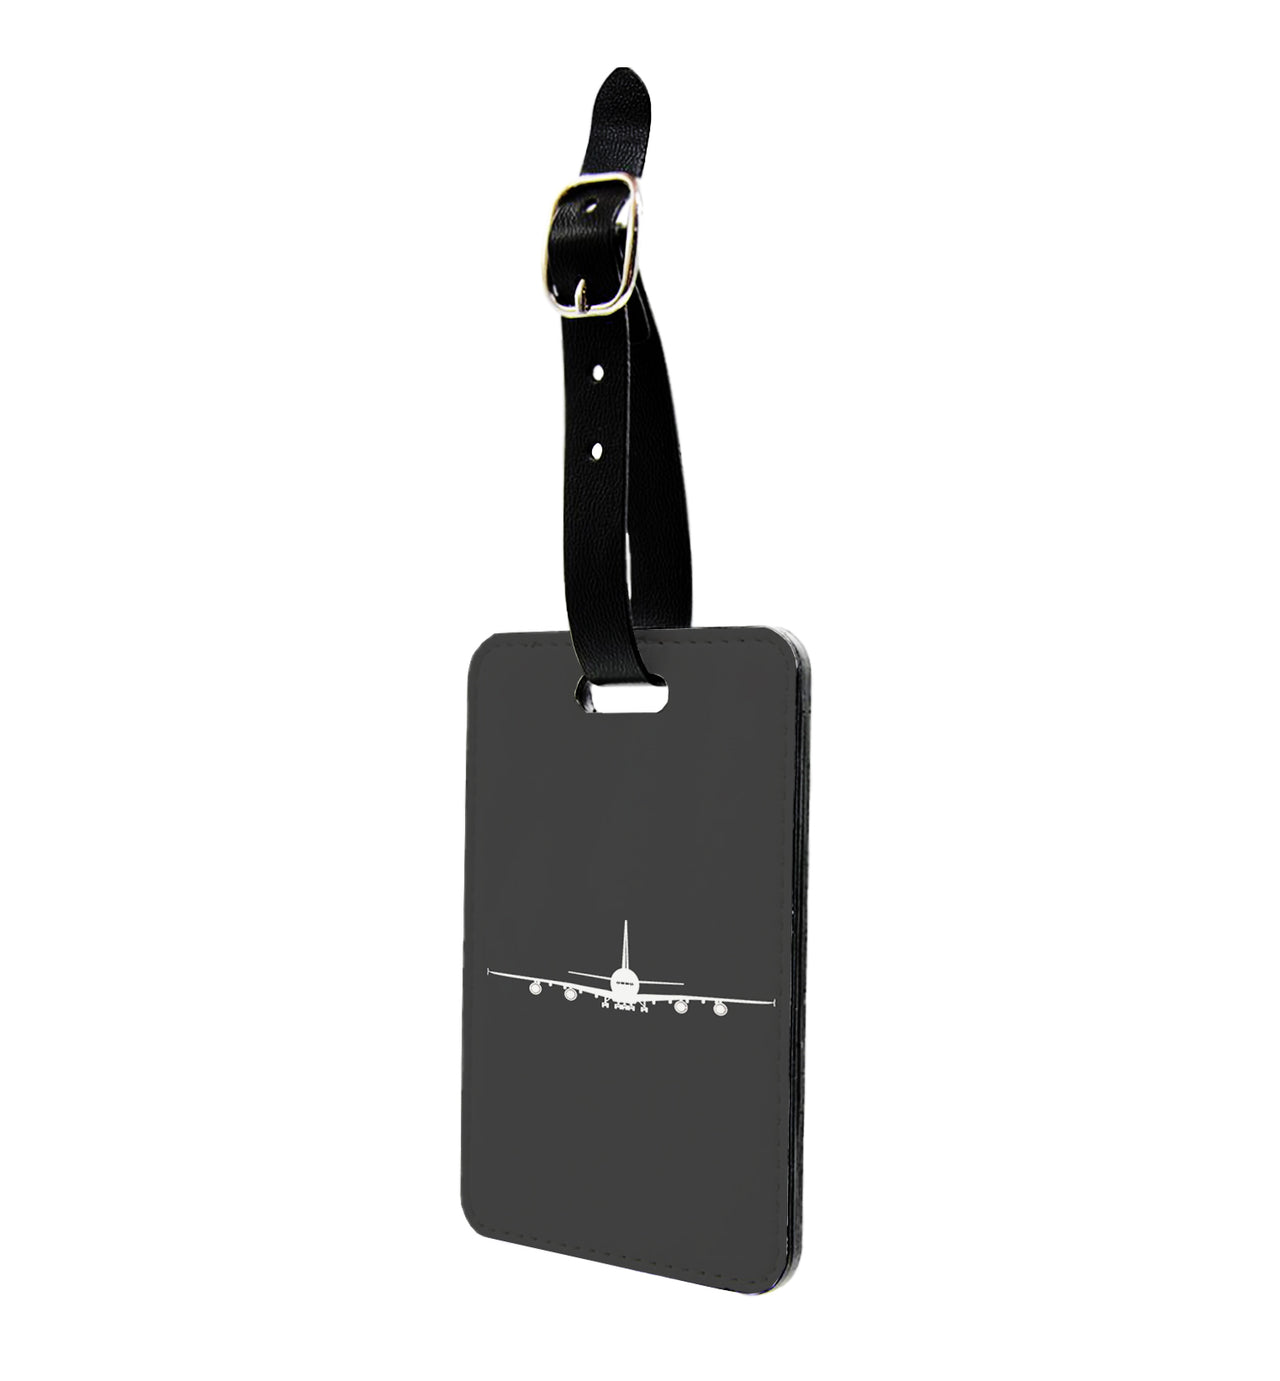 Airbus A380 Silhouette Designed Luggage Tag